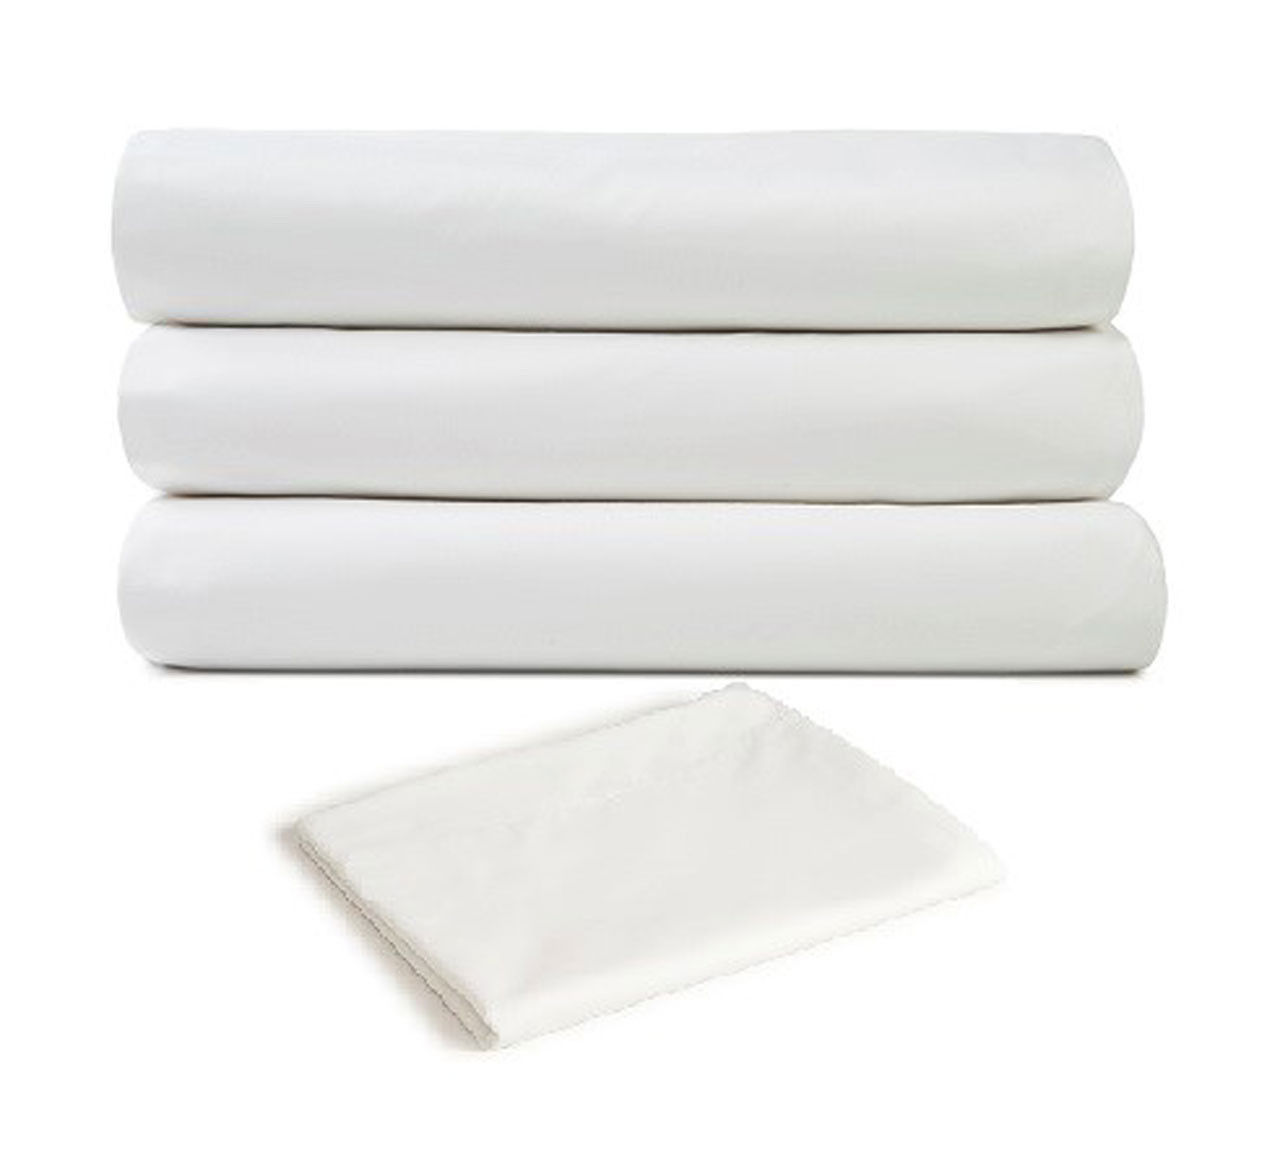 Will 100 polyester bed sheets improve my hotel guest's experience?